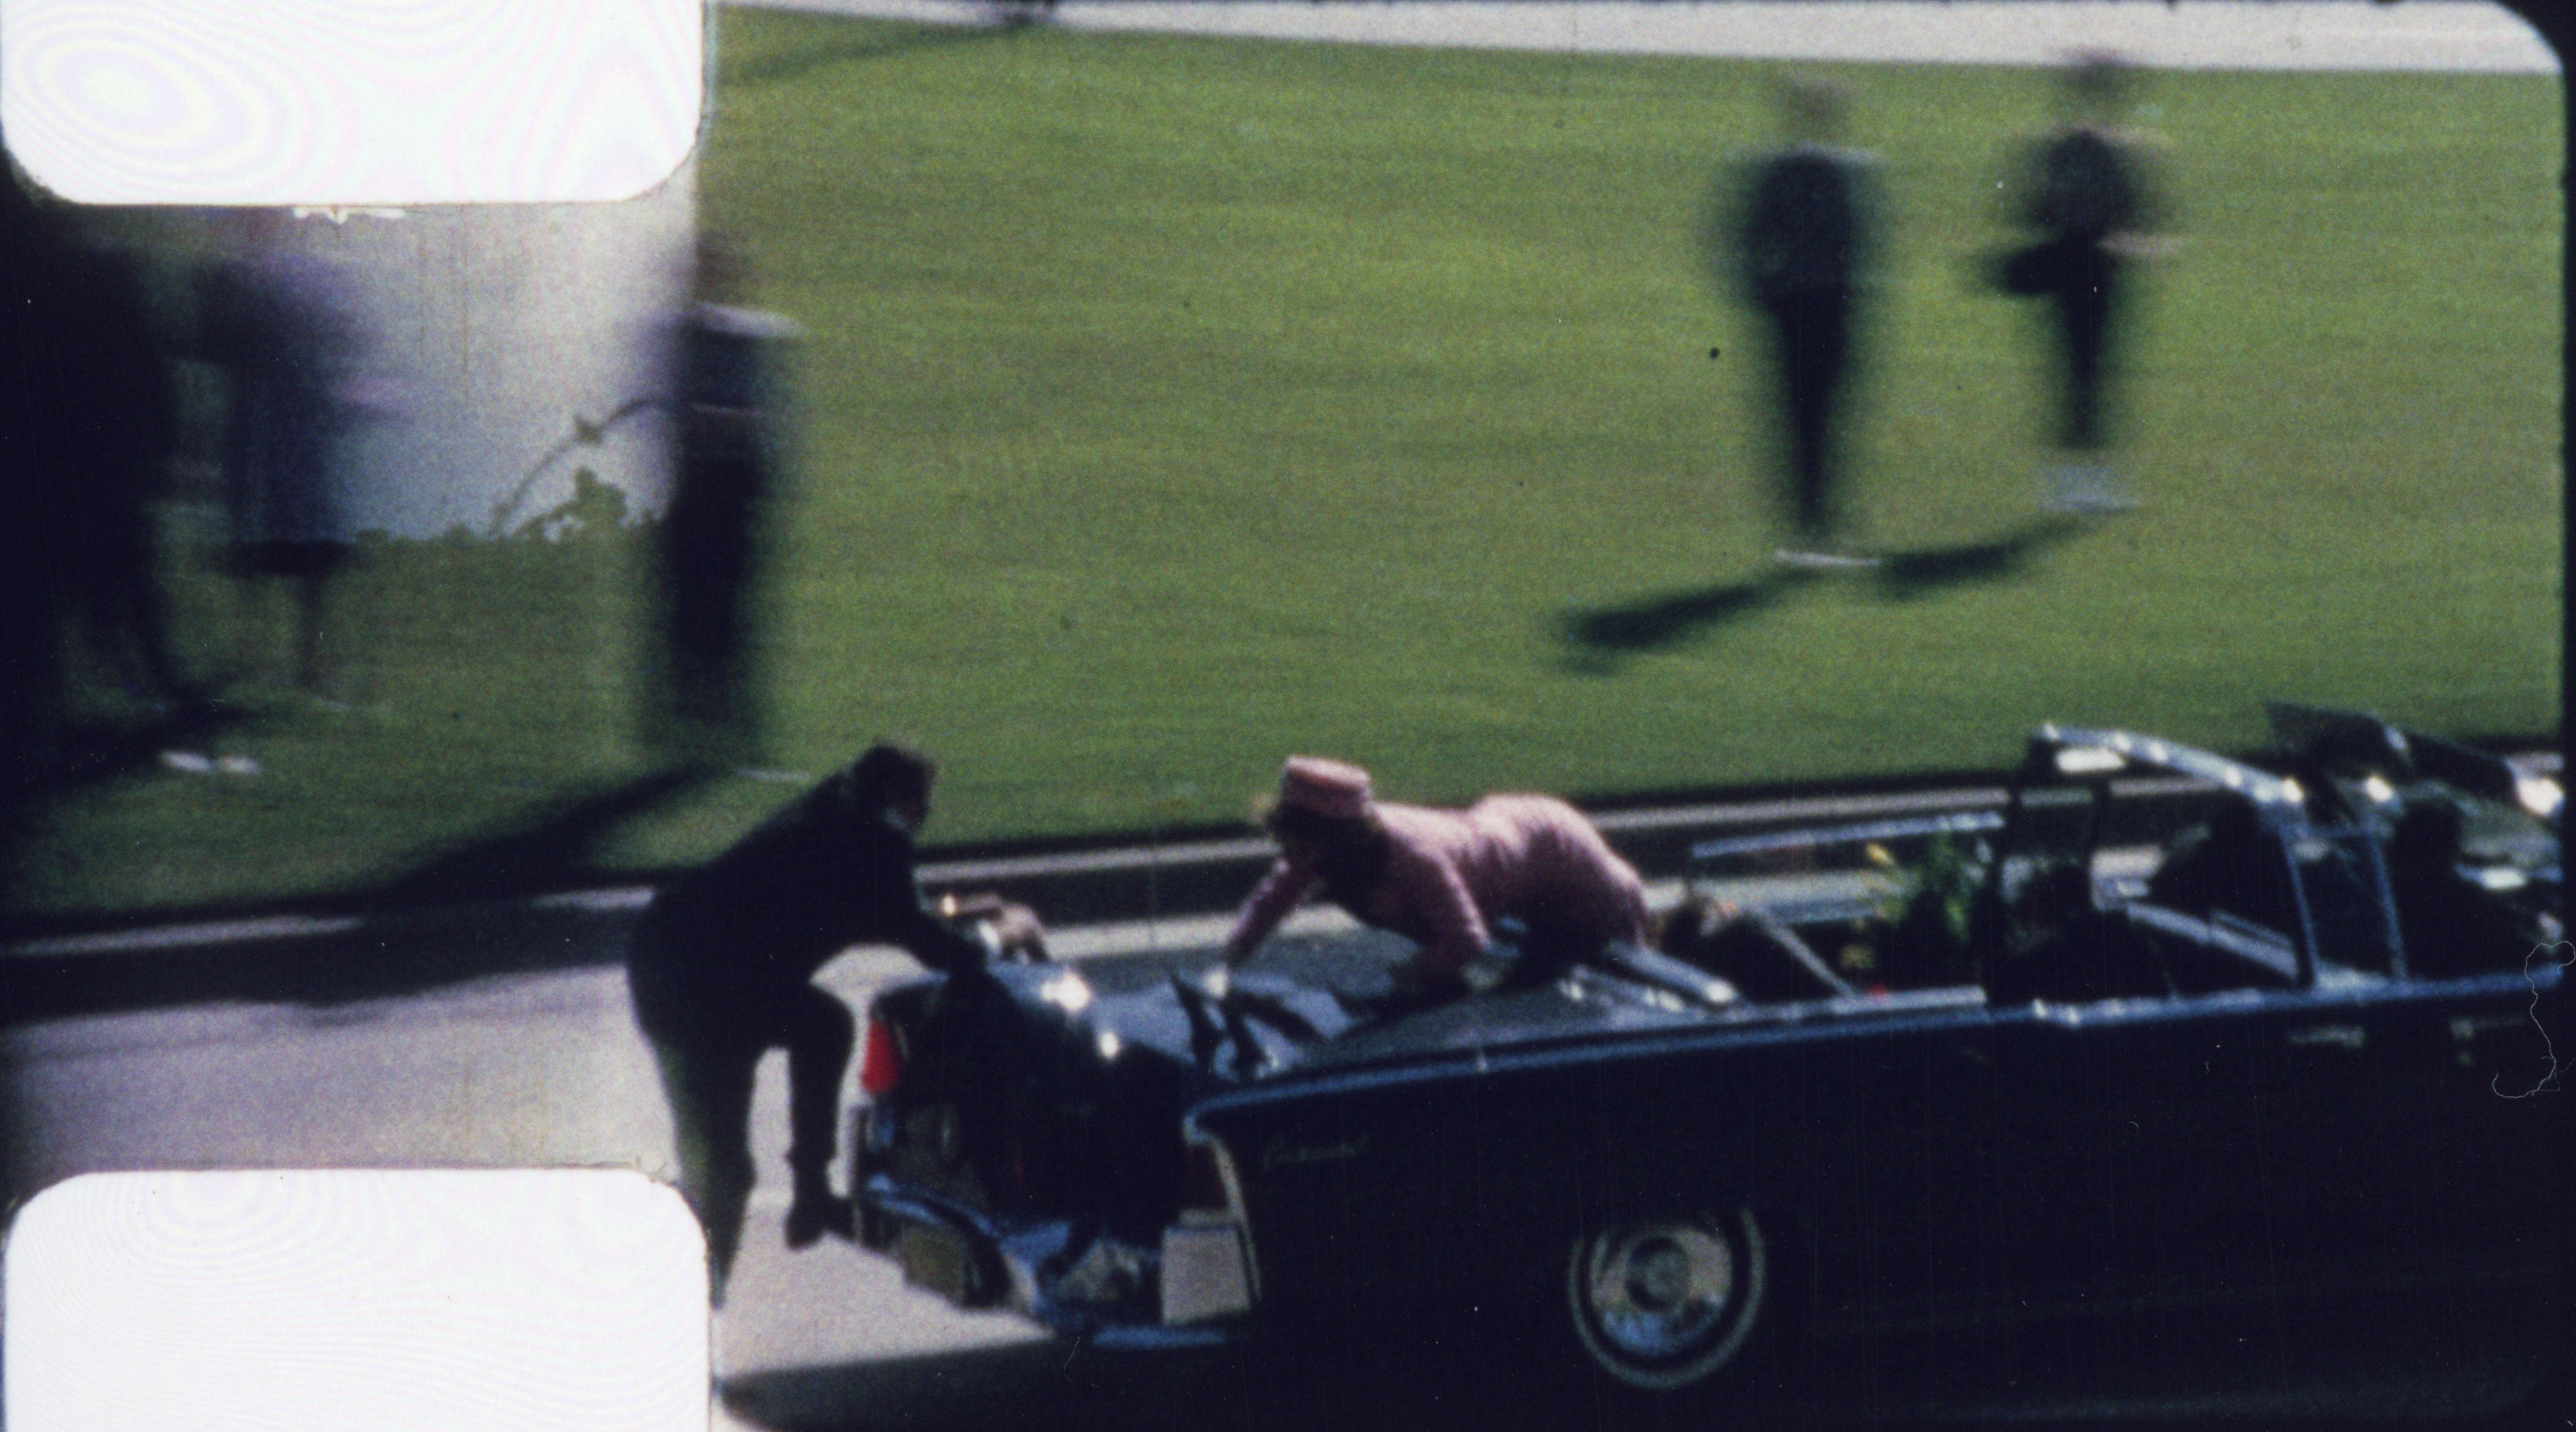 5 Jfk Conspiracy Theories People Still Believe 50 Years After